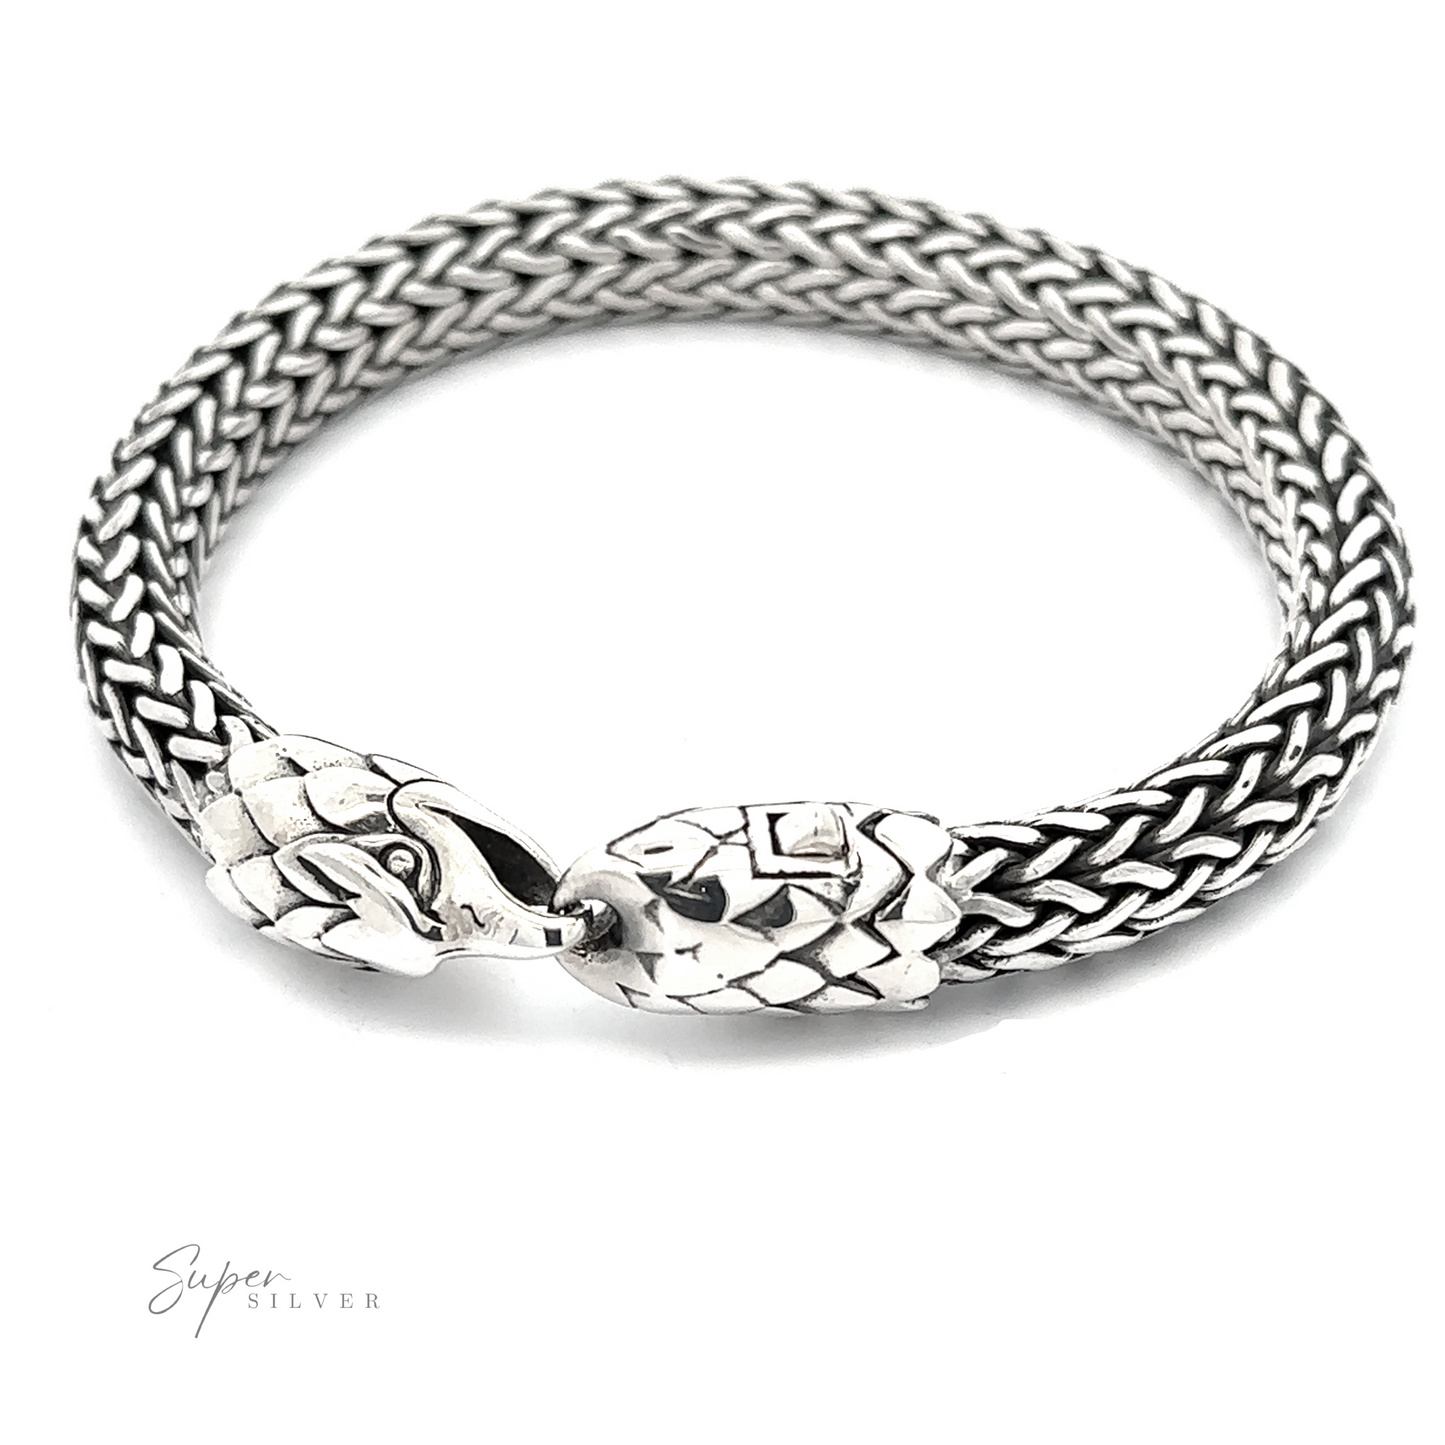 A bold bracelet crafted from .925 Sterling Silver, this piece features a woven design with two intricately designed eagle heads facing each other at the clasp.